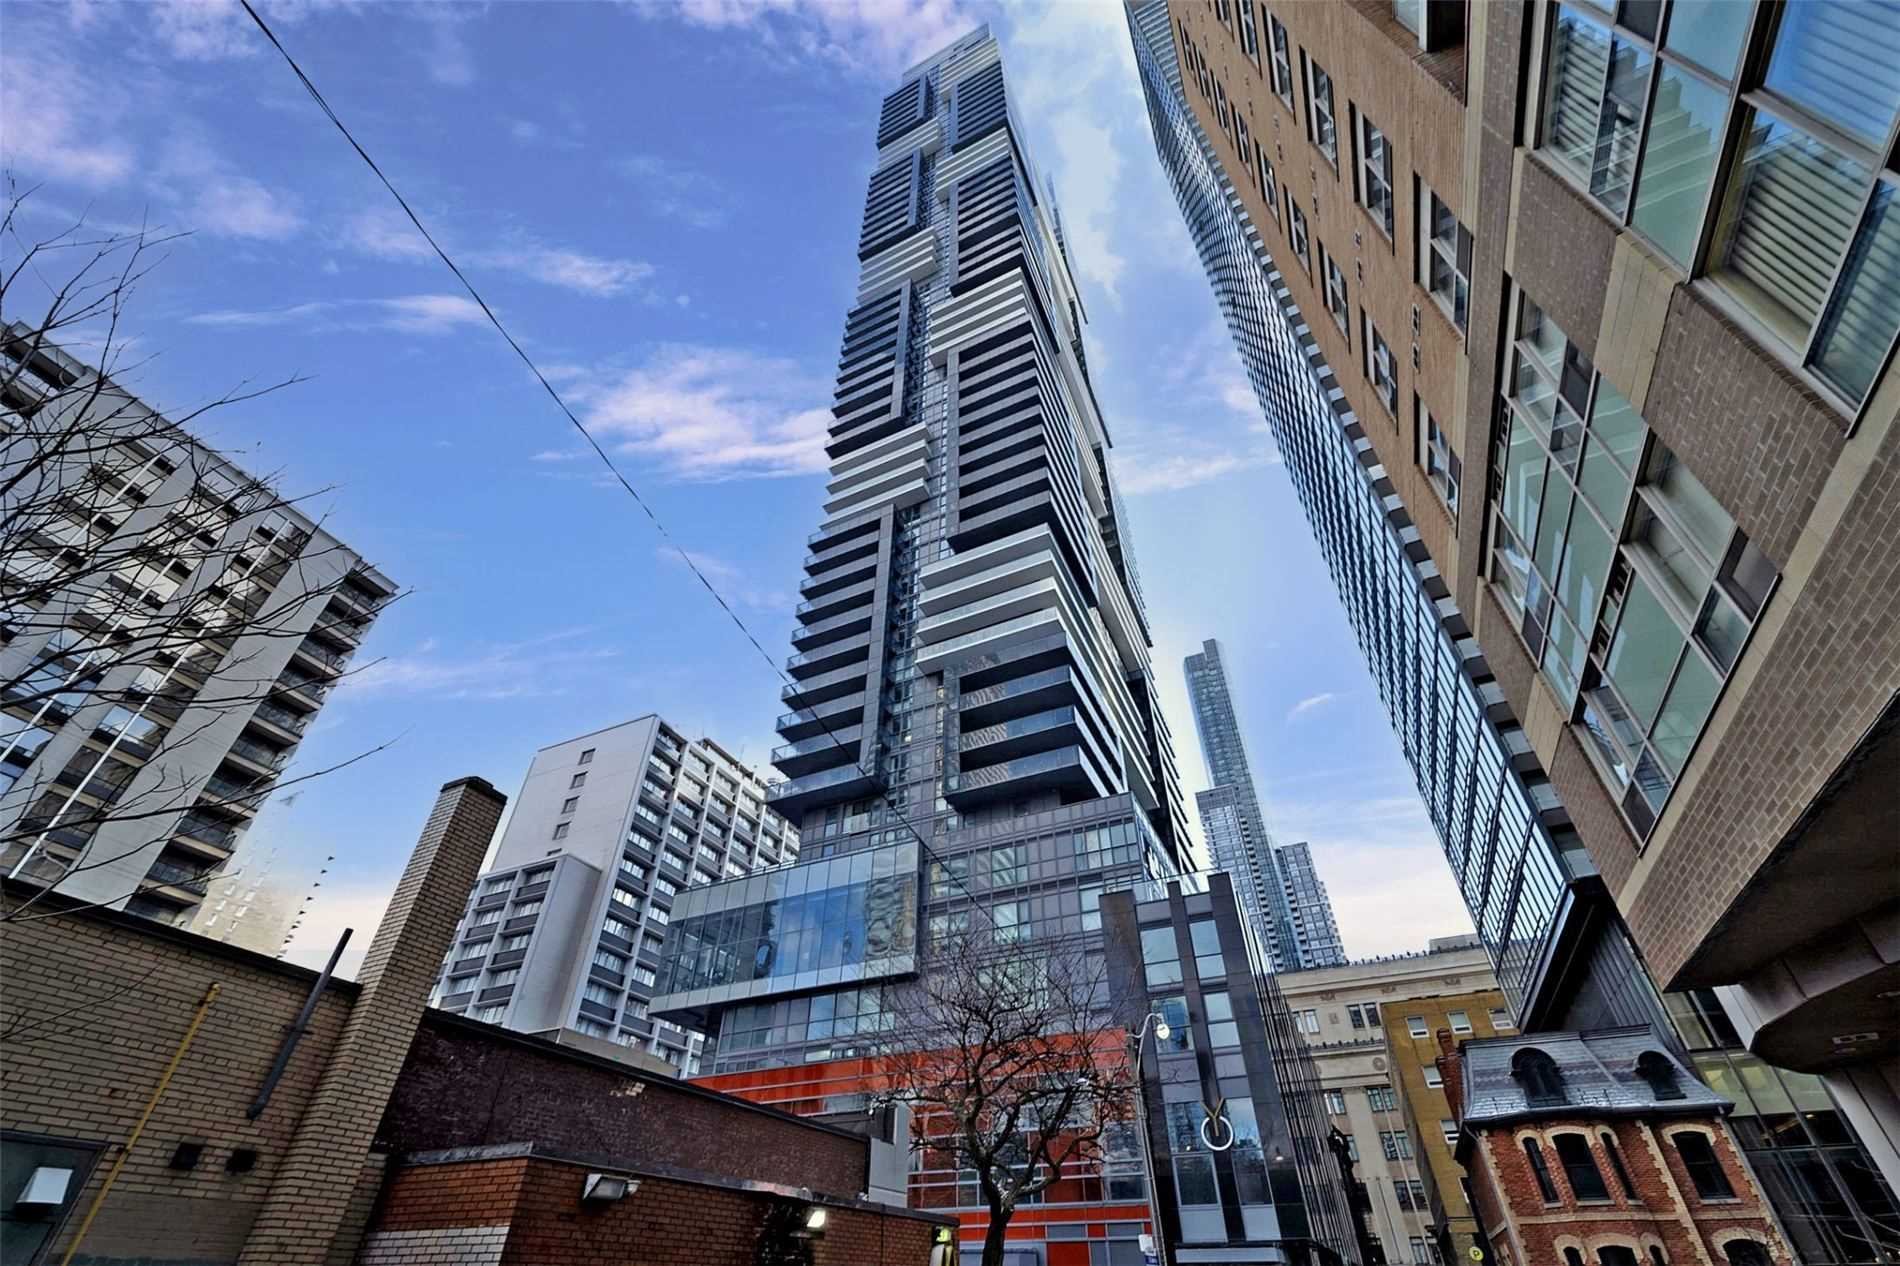 8 Buildings In Downtown Toronto With Two-Storey Units